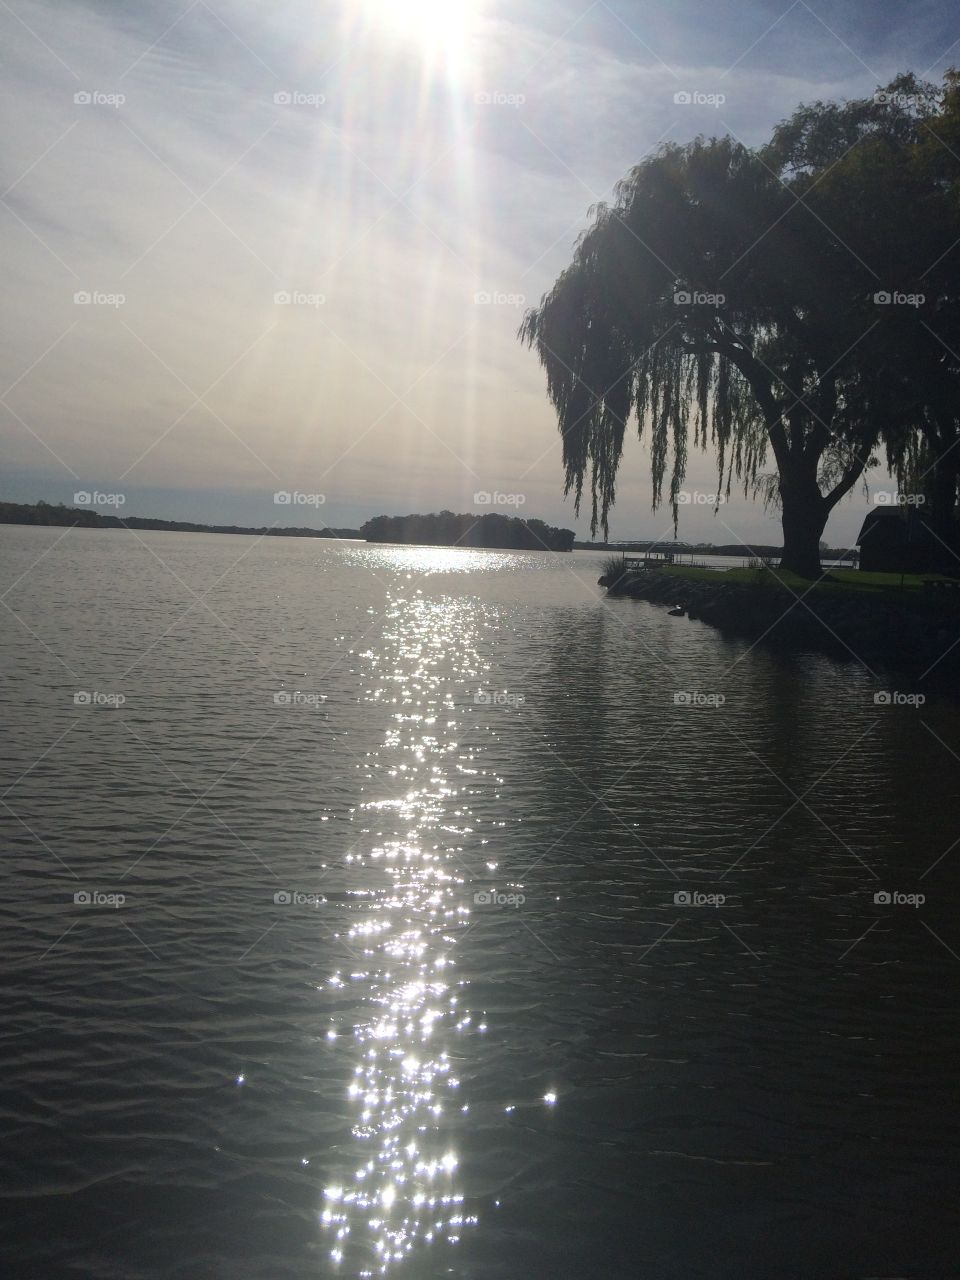 Water sunlight on water reflections island weeping willow tree leaves outside green grass sky clouds beautiful nature 